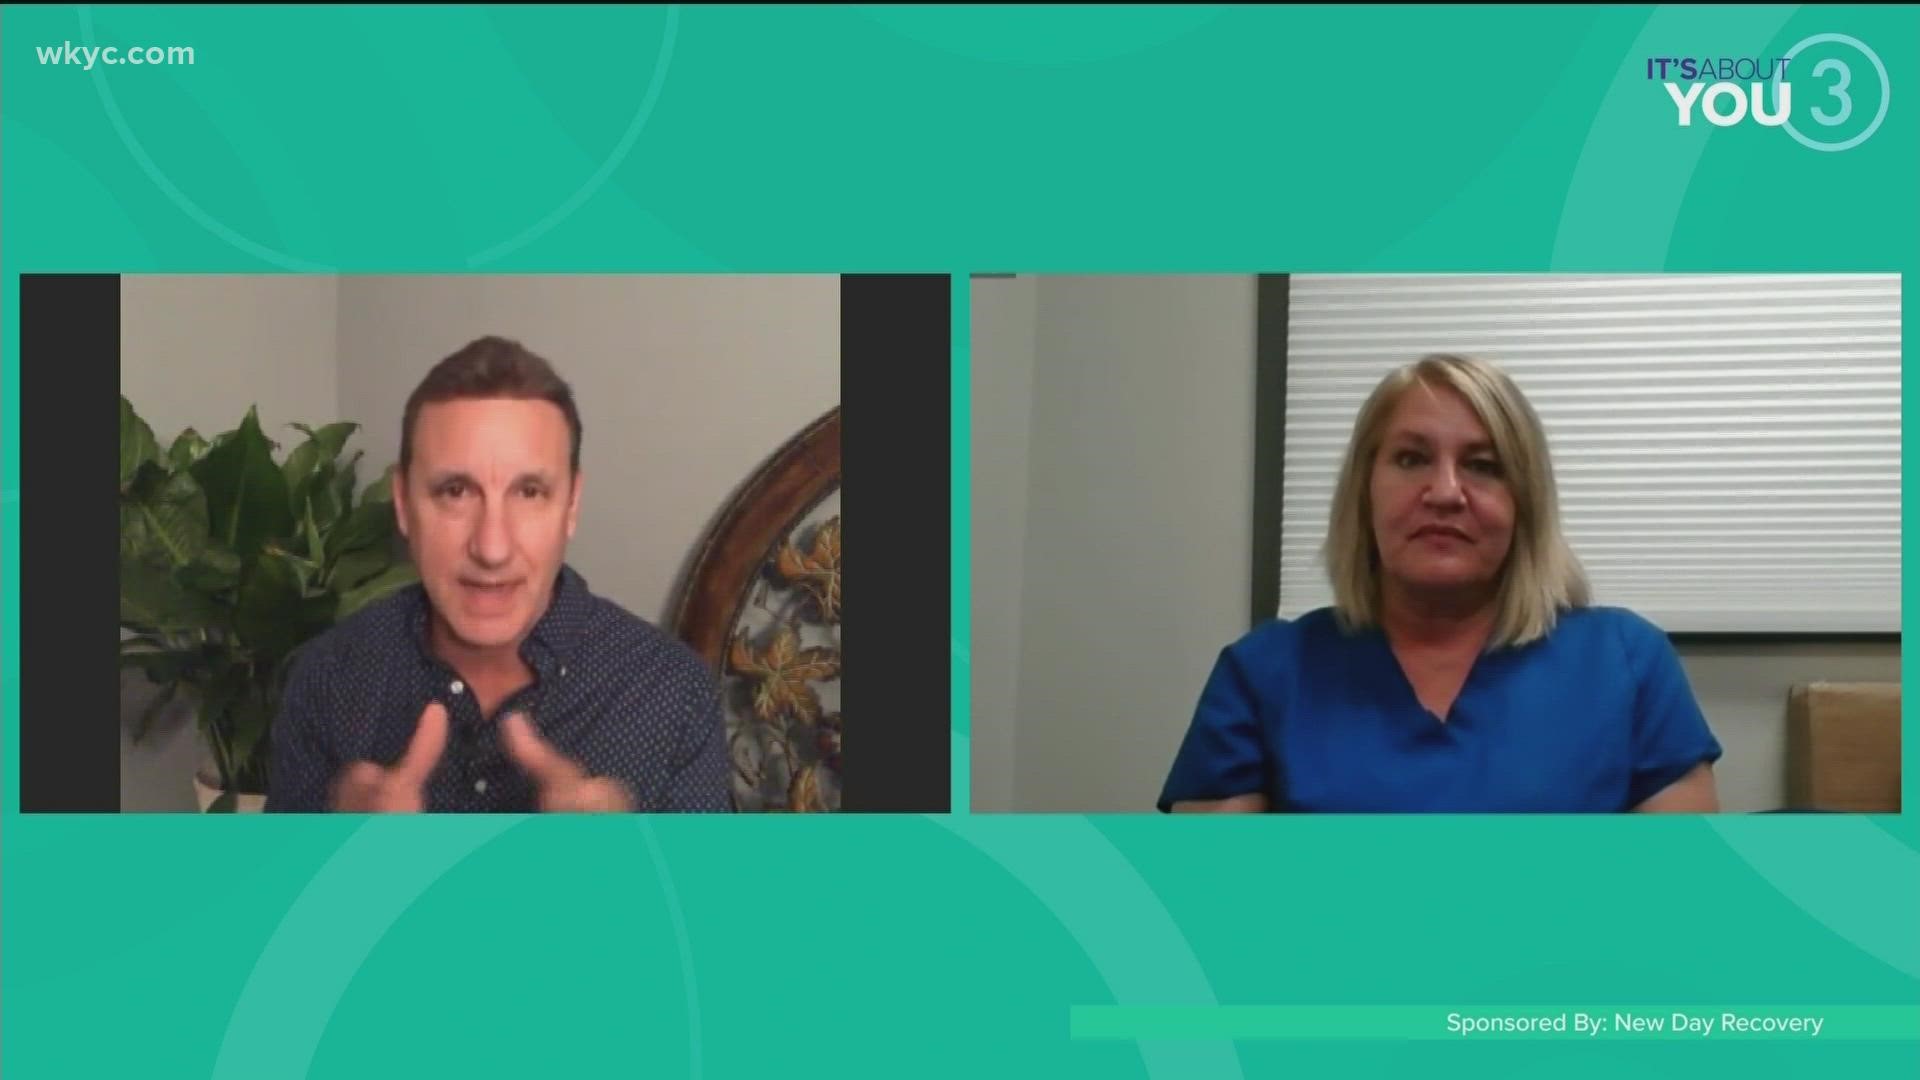 Addiction effects everyone and New Day Recovery is here to help. Joe talks with Amy Heasley-Pavlik about the detox program and being in control again.